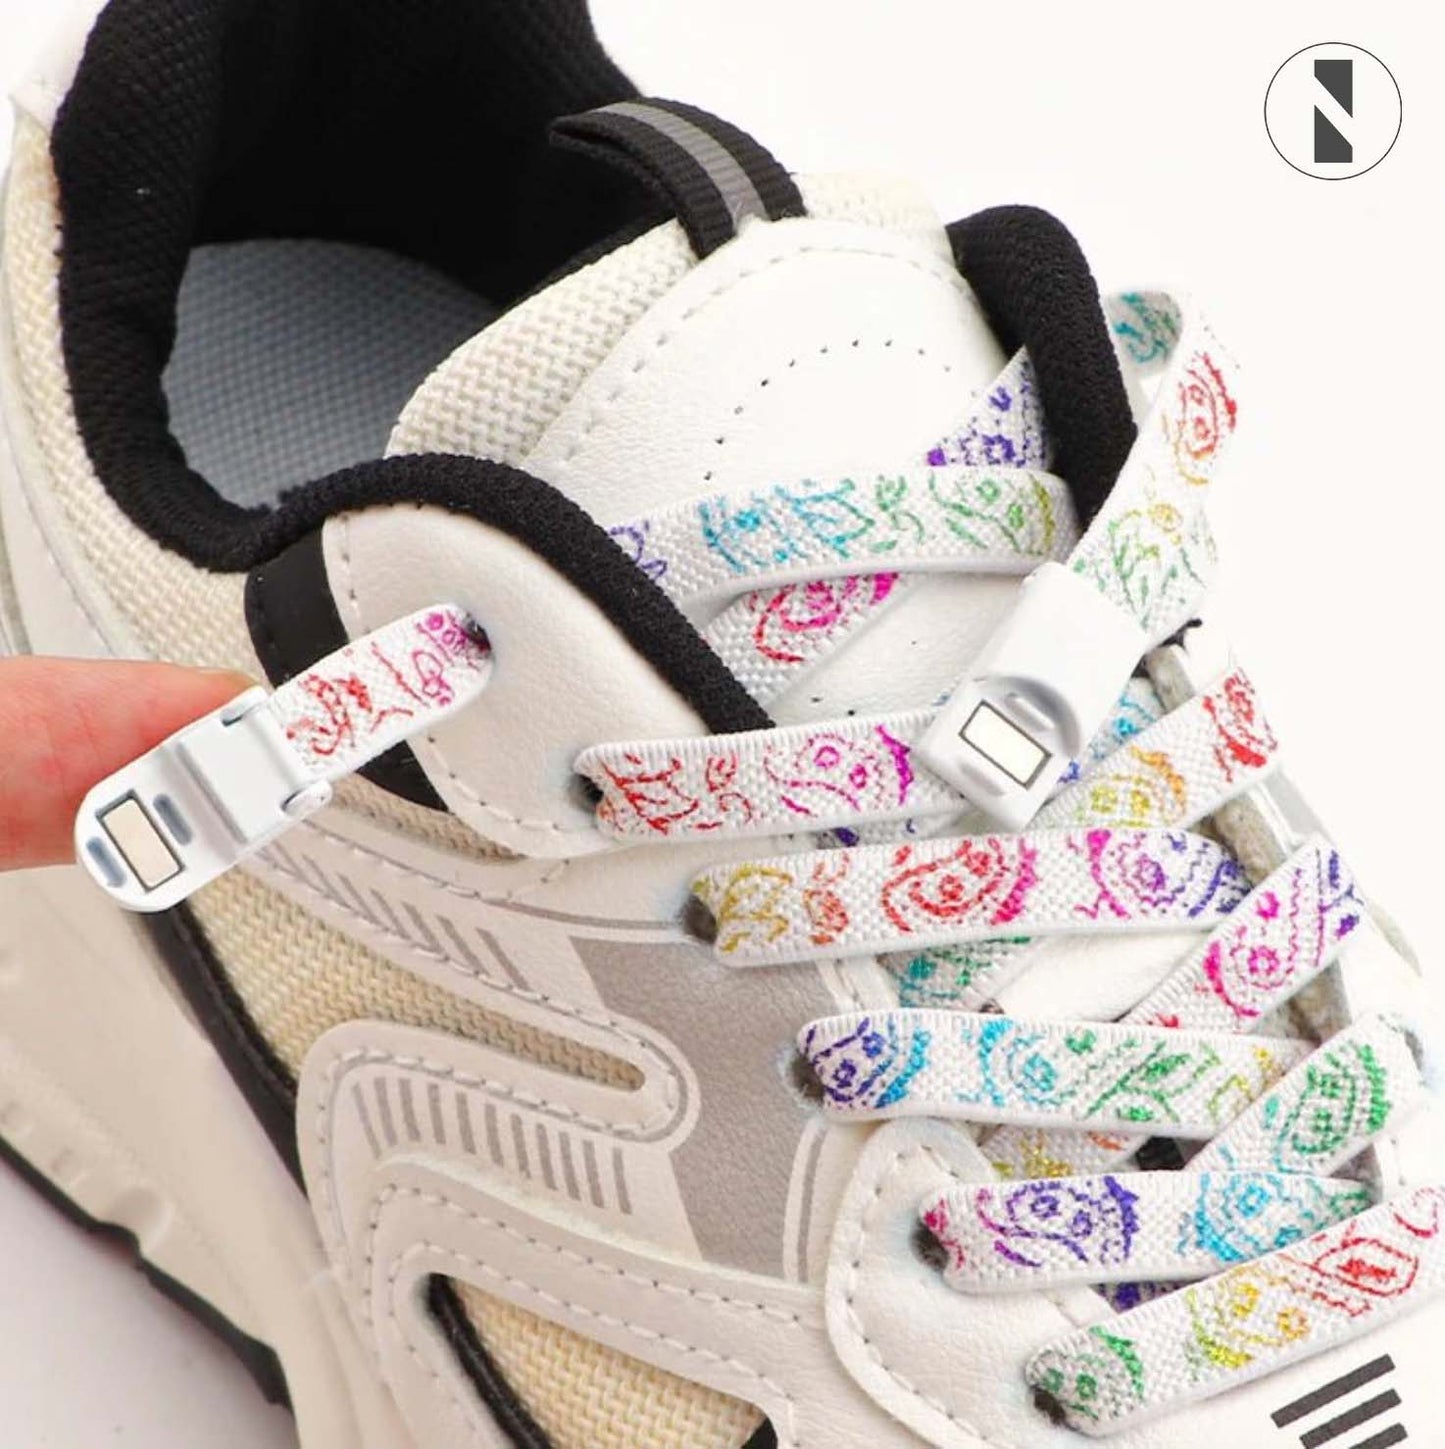 The No-Tie Kids magnetic shoelaces